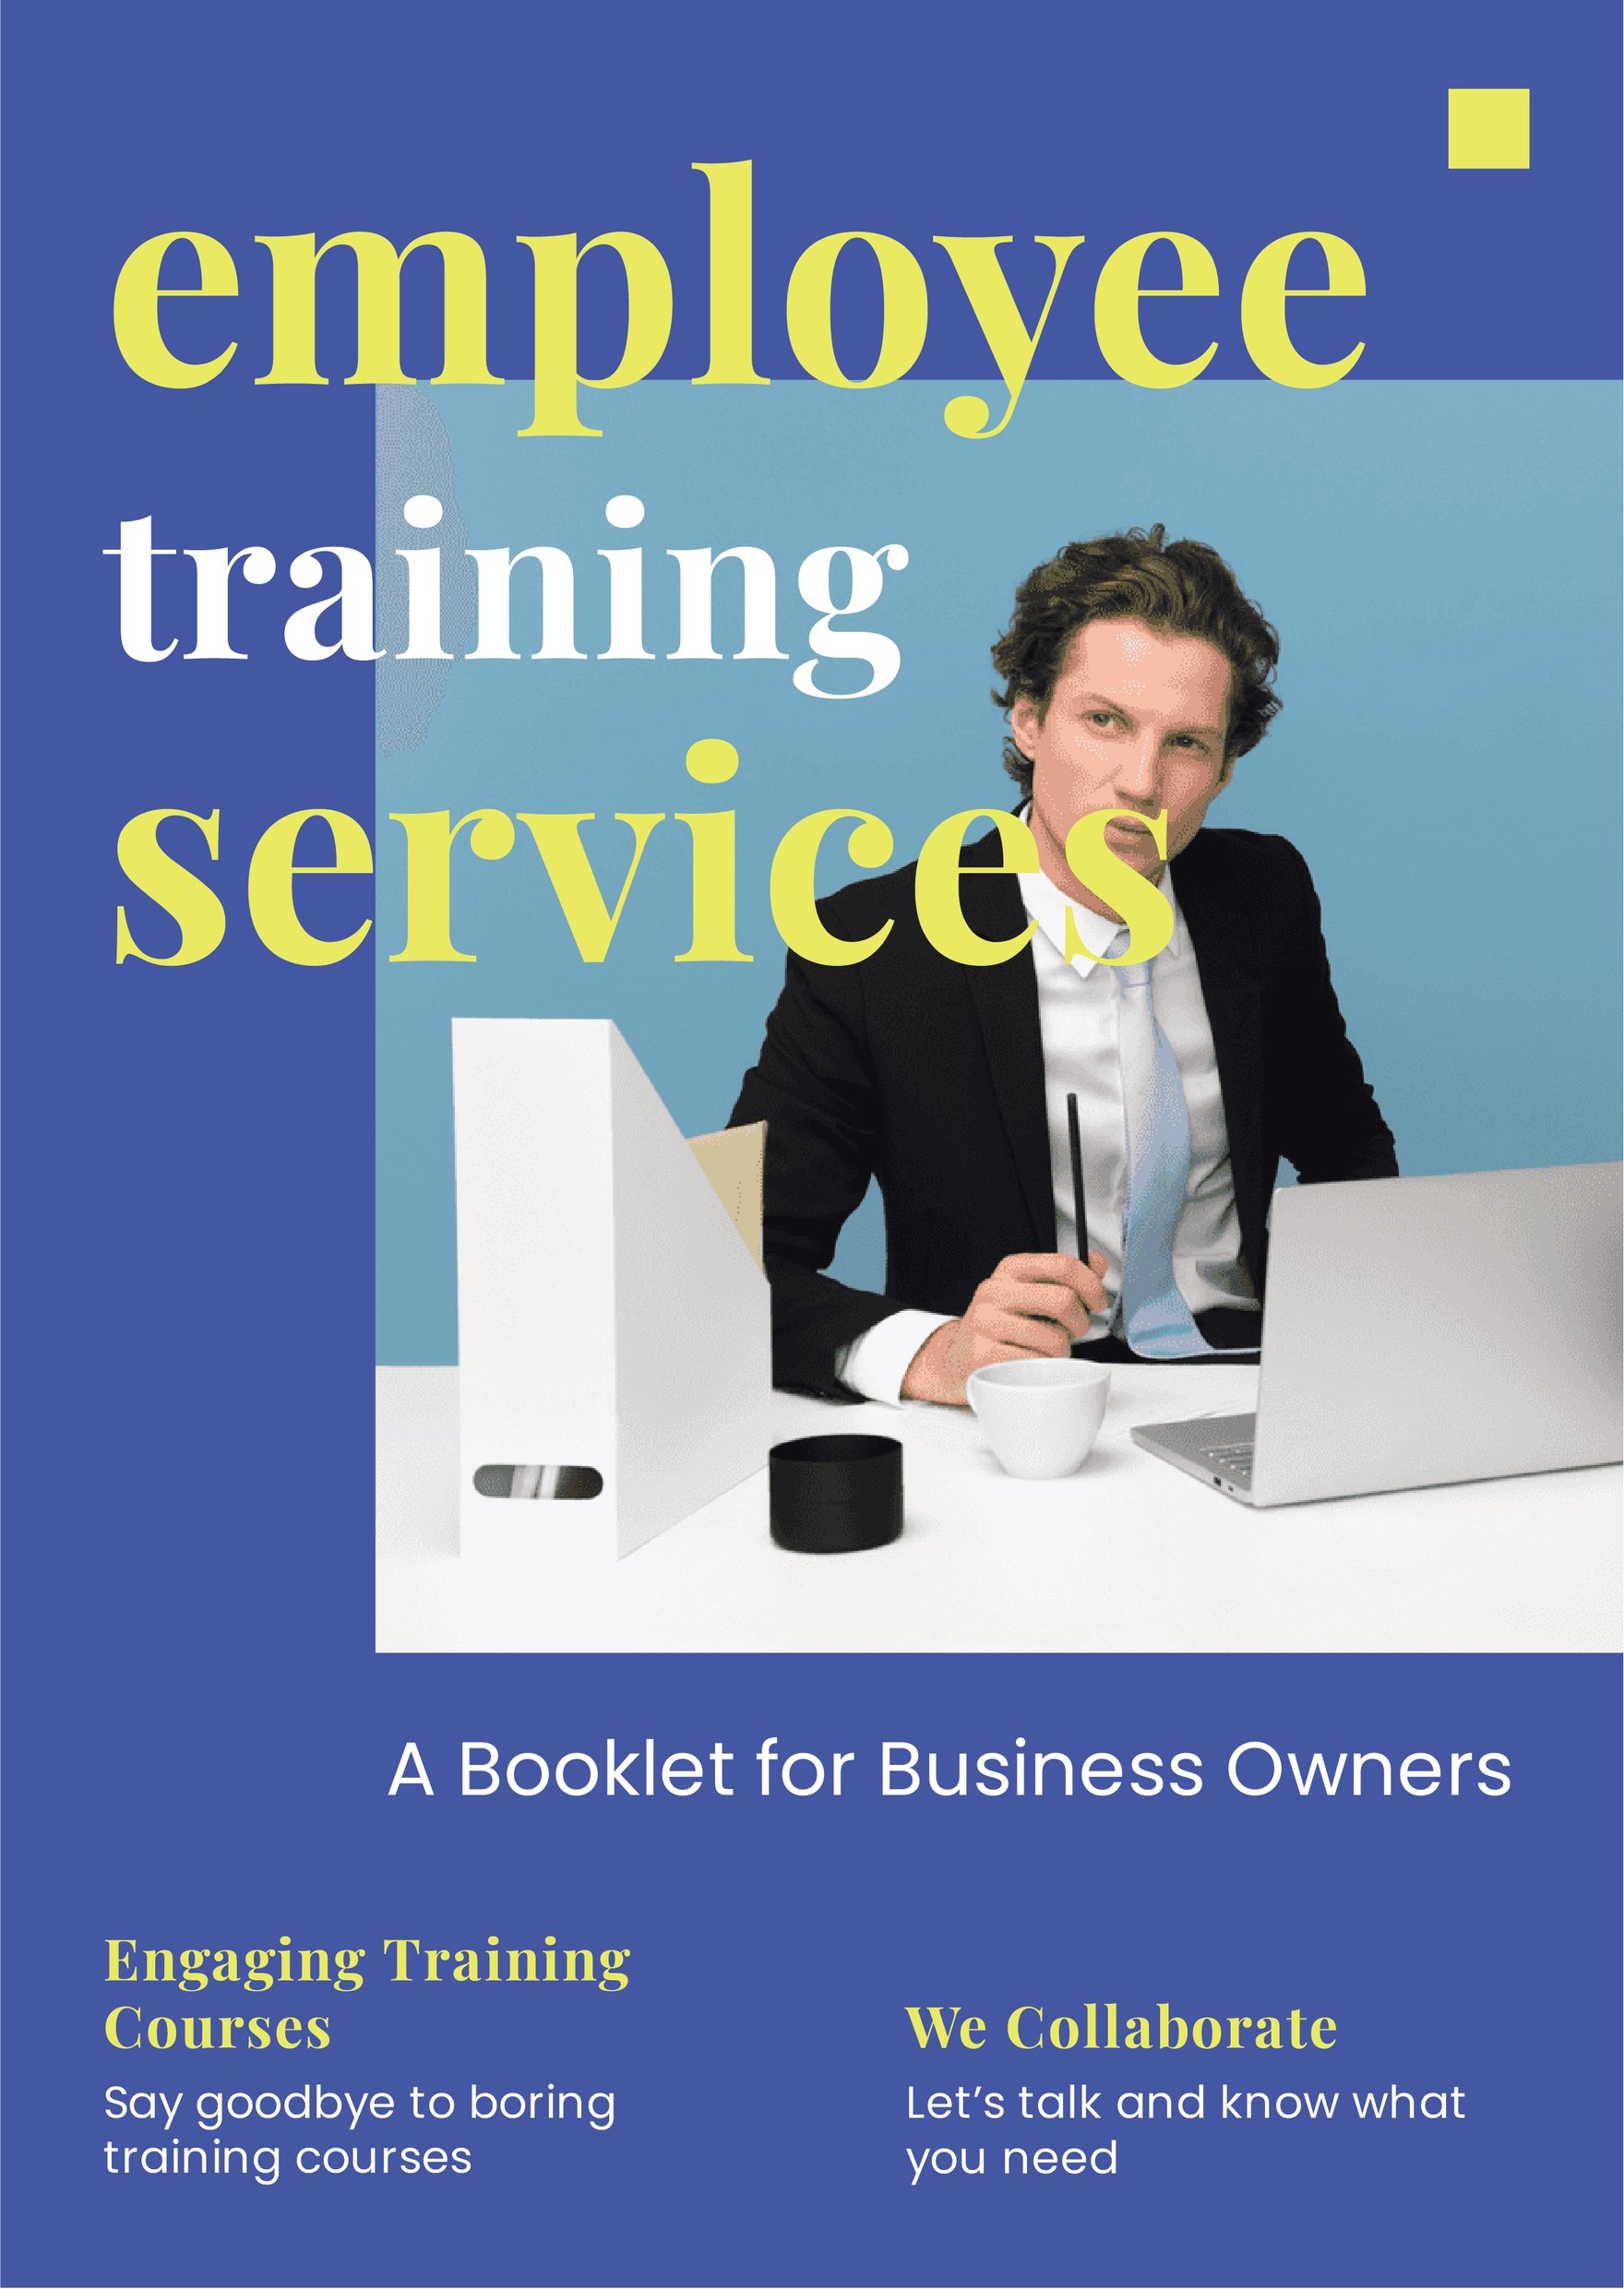 Employee Training Booklet Template in Word, Google Docs, Illustrator, PSD, Apple Pages, Publisher